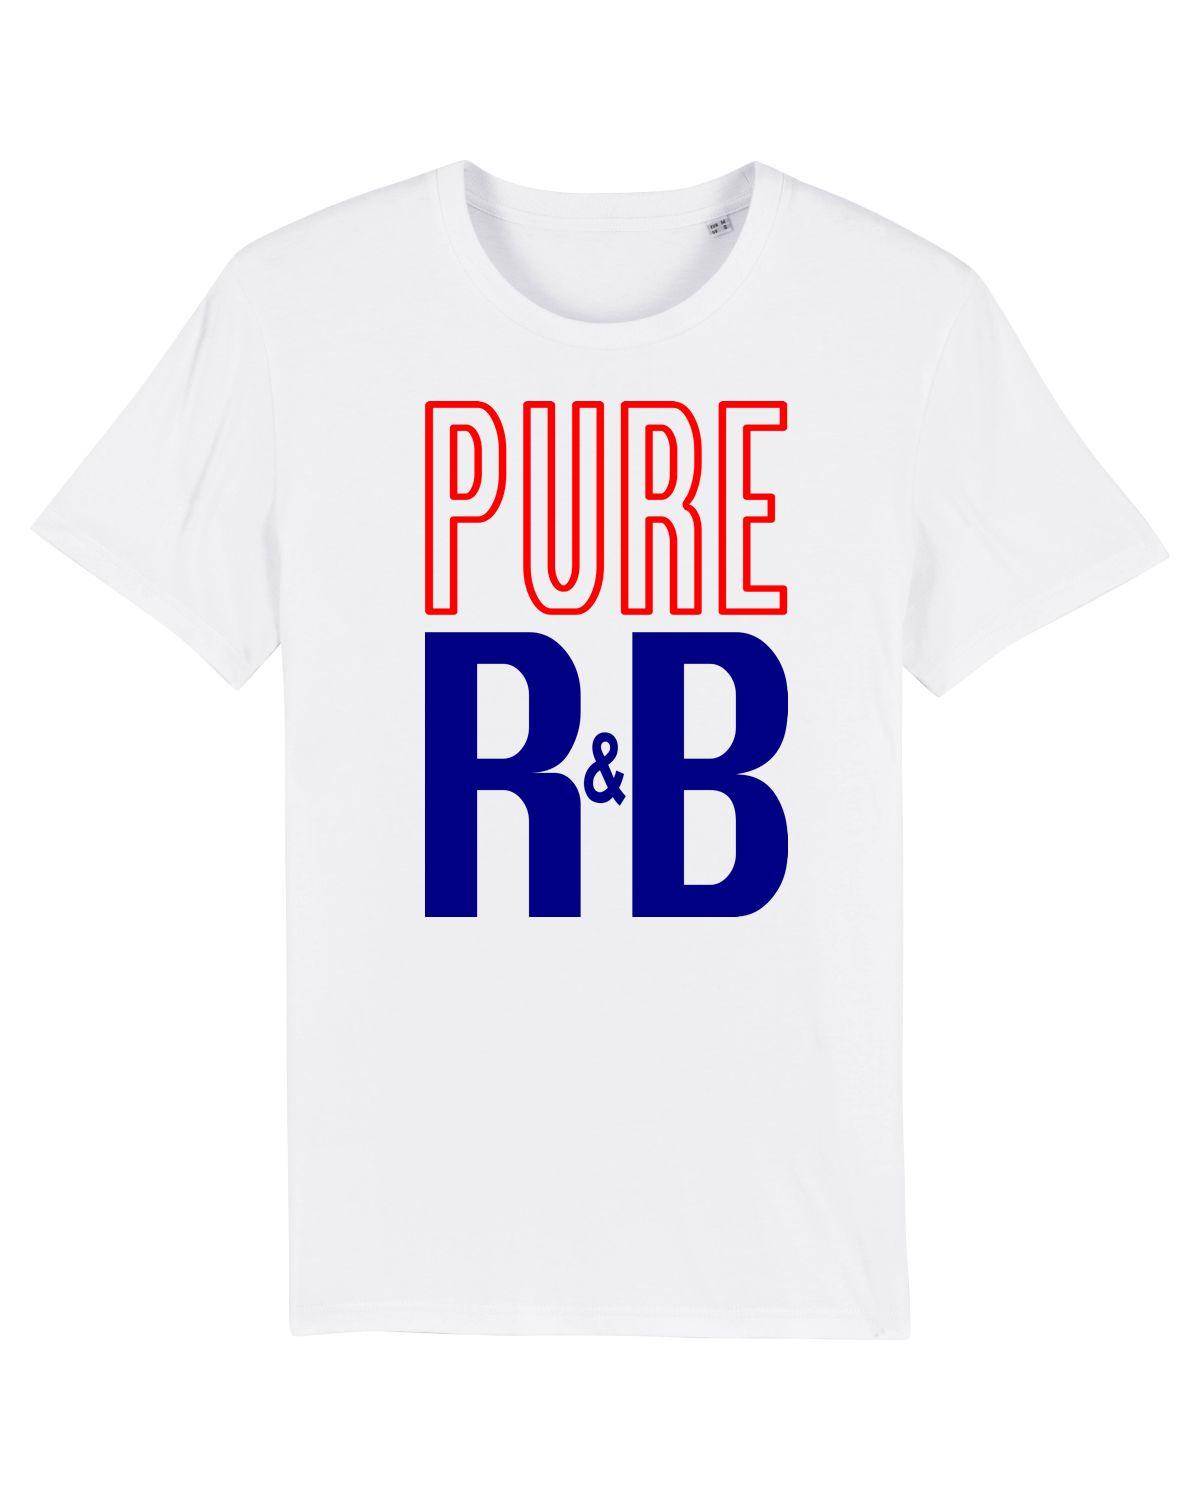 PURE R&B - Premium Organic T-Shirt Inspided By 80s Mods Culture (3 Colours) - Suit Yourself Music